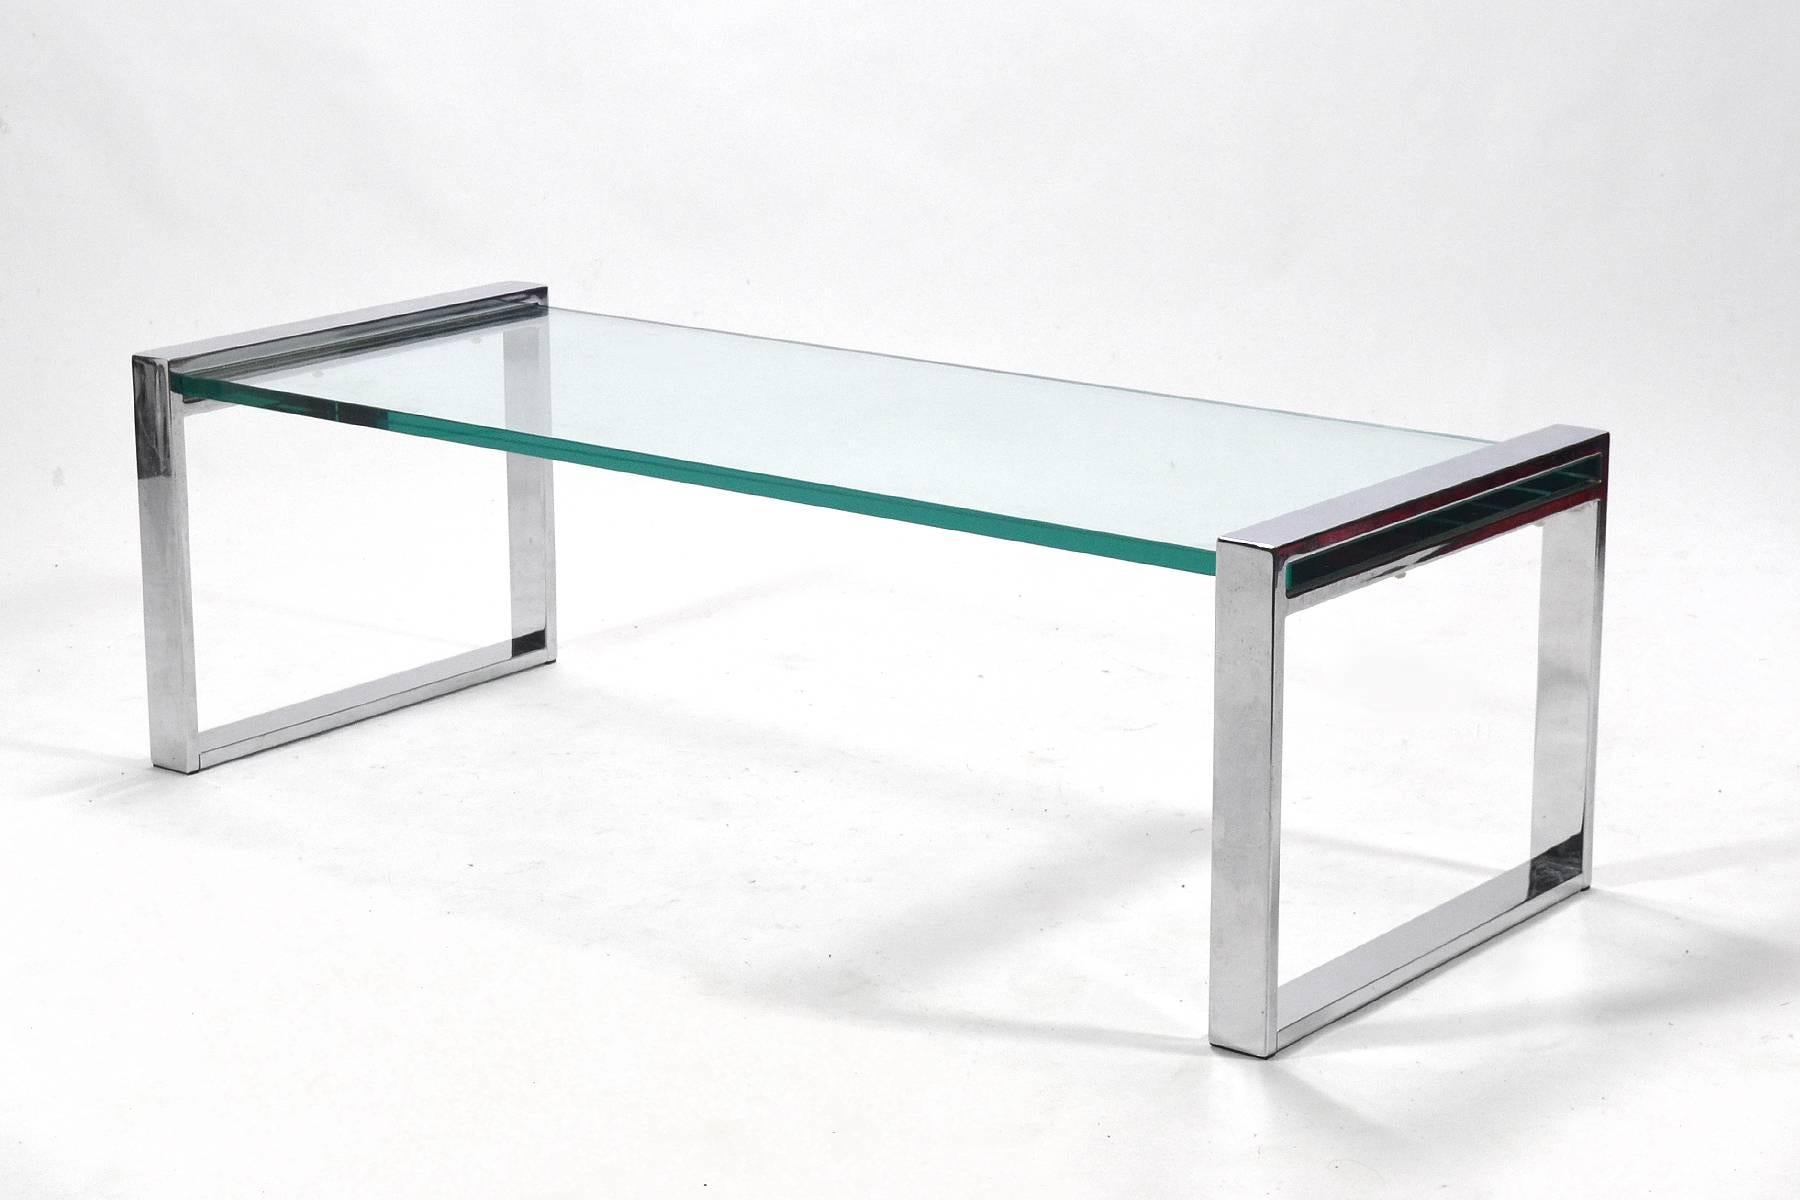 This wonderful coffee table by Cy Mann has a chromed steel base, a glass top and a great architectural quality. This seldom seen design perfectly complements Mann's chrome framed lounge chairs. This table was purchased en suite with a pair of Cy